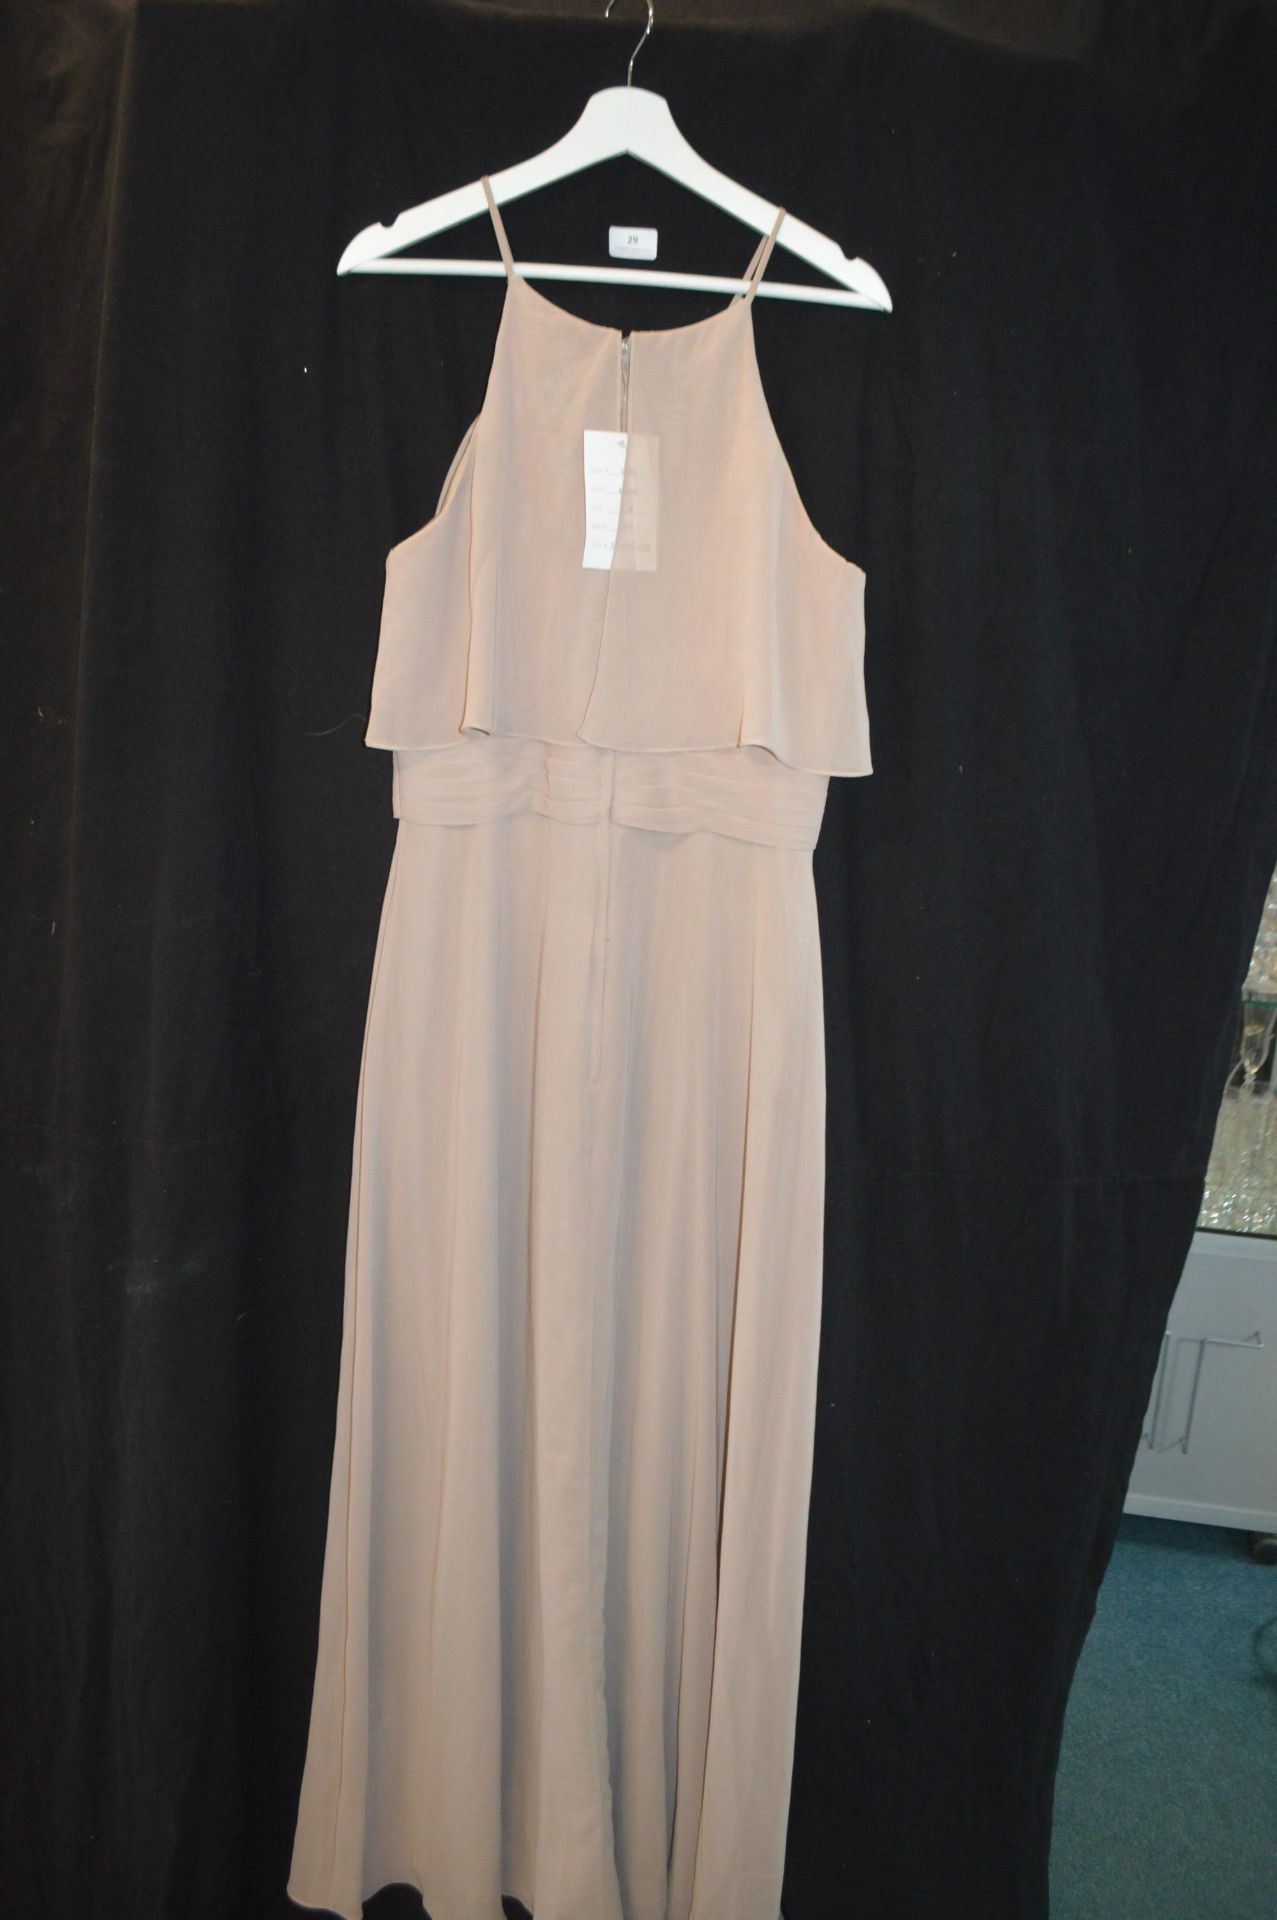 Prom Dress in Mocha by Kenneth Winston for Private Label Size: 14 - Image 2 of 2